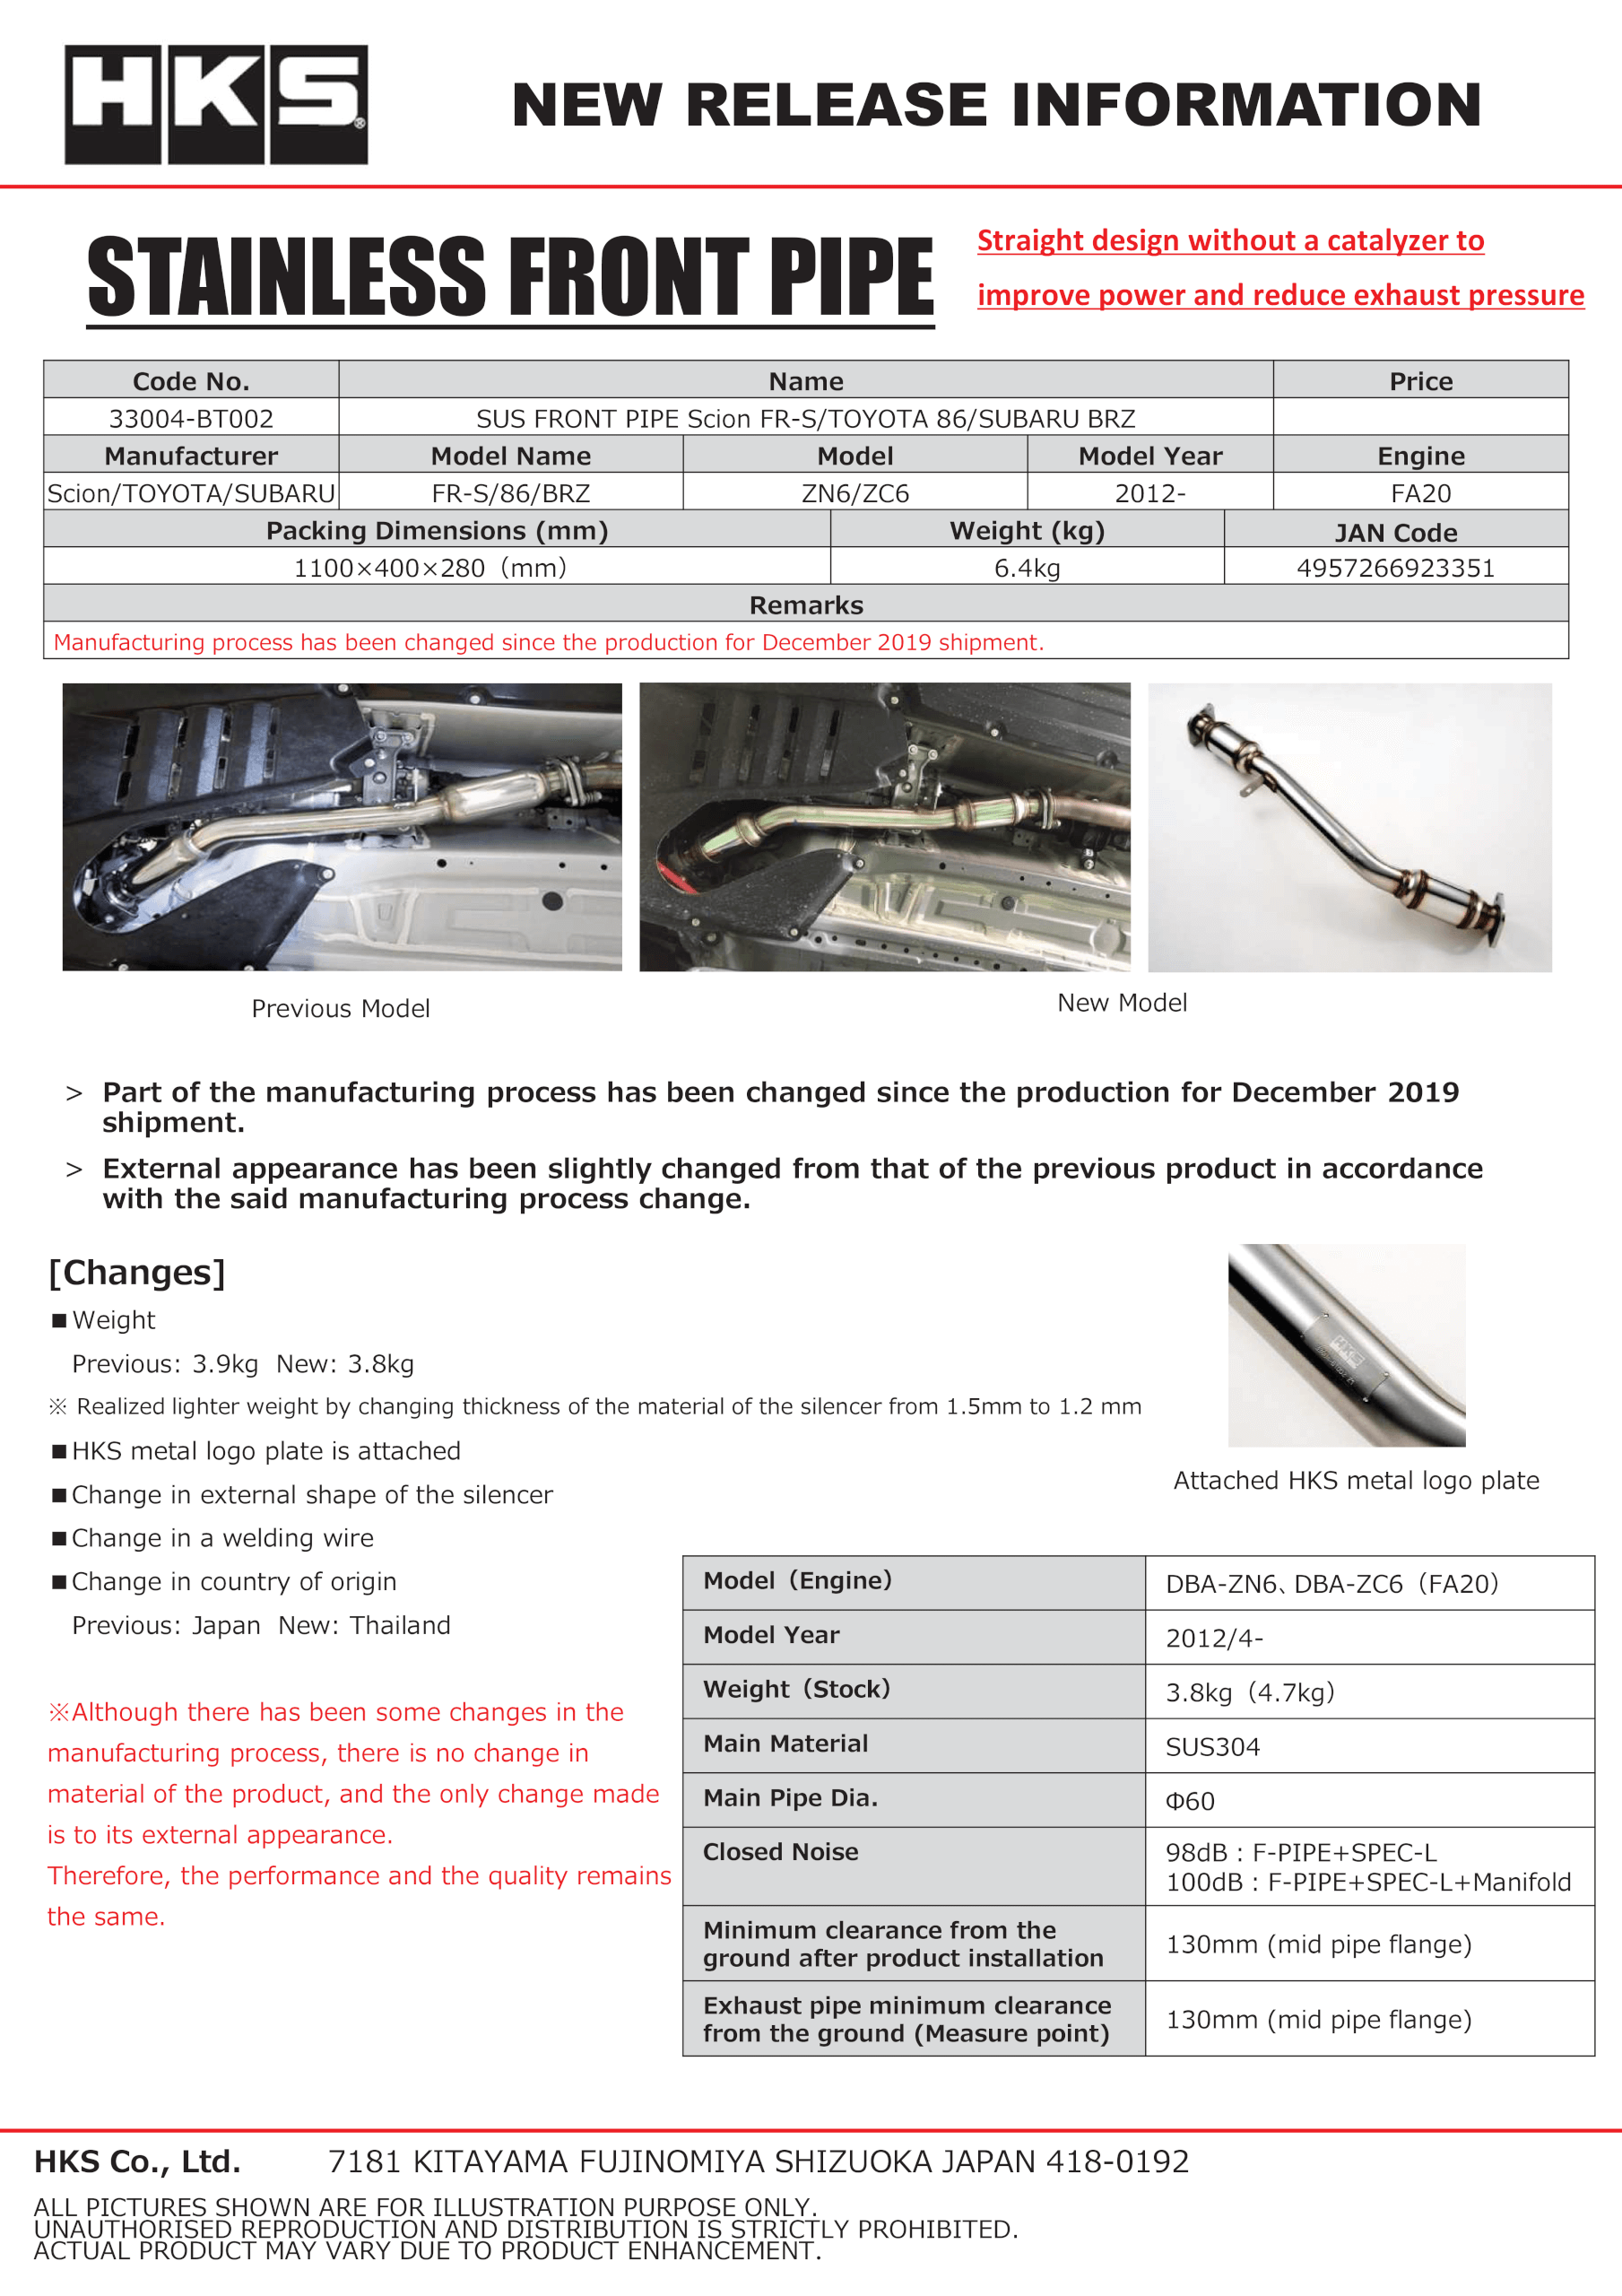 33004-BT002_STAINLESS FRONT PIPE FR-S・86・BRZ_Apr 2020-01.png